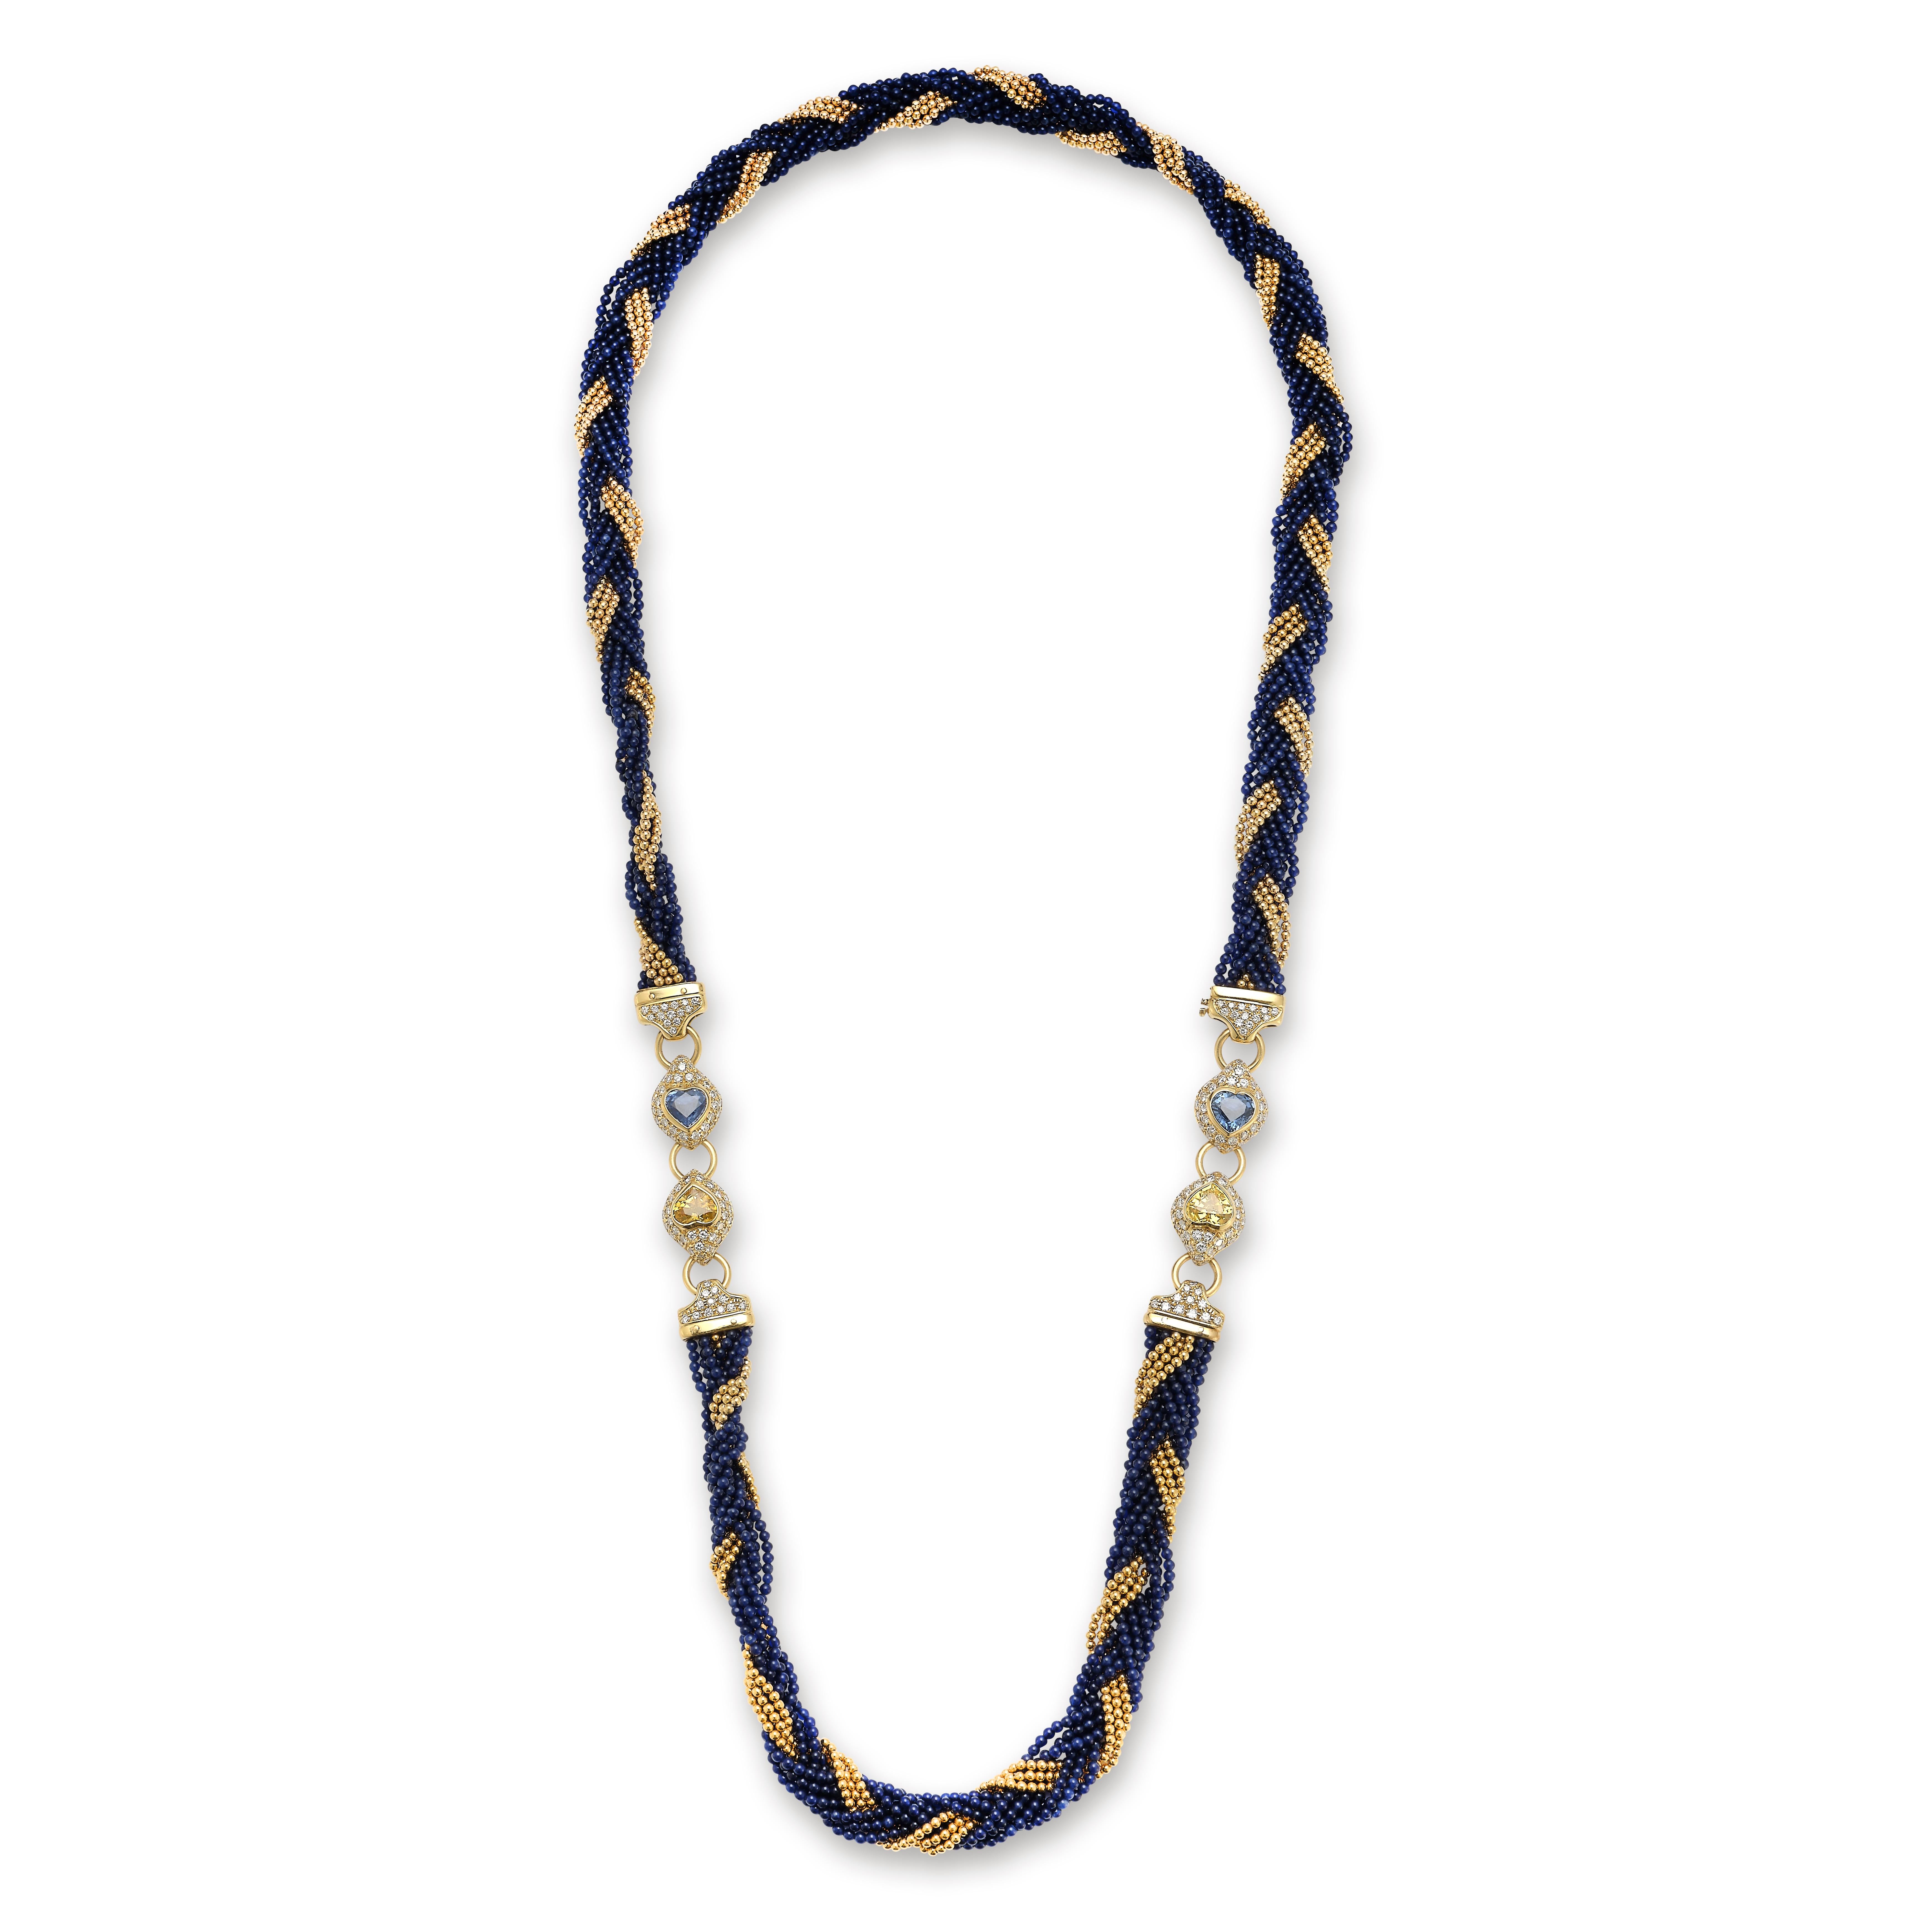 Sapphire & Gold Bead Diamond Necklace

Multi strands of 18 karat gold & blue glass beads attaching set with diamonds & heart shape sapphires.

Yellow Sapphire Weight: approximately 6.06 cts 
Blue Sapphire Weight: approximately 6.06 cts 
Diamond